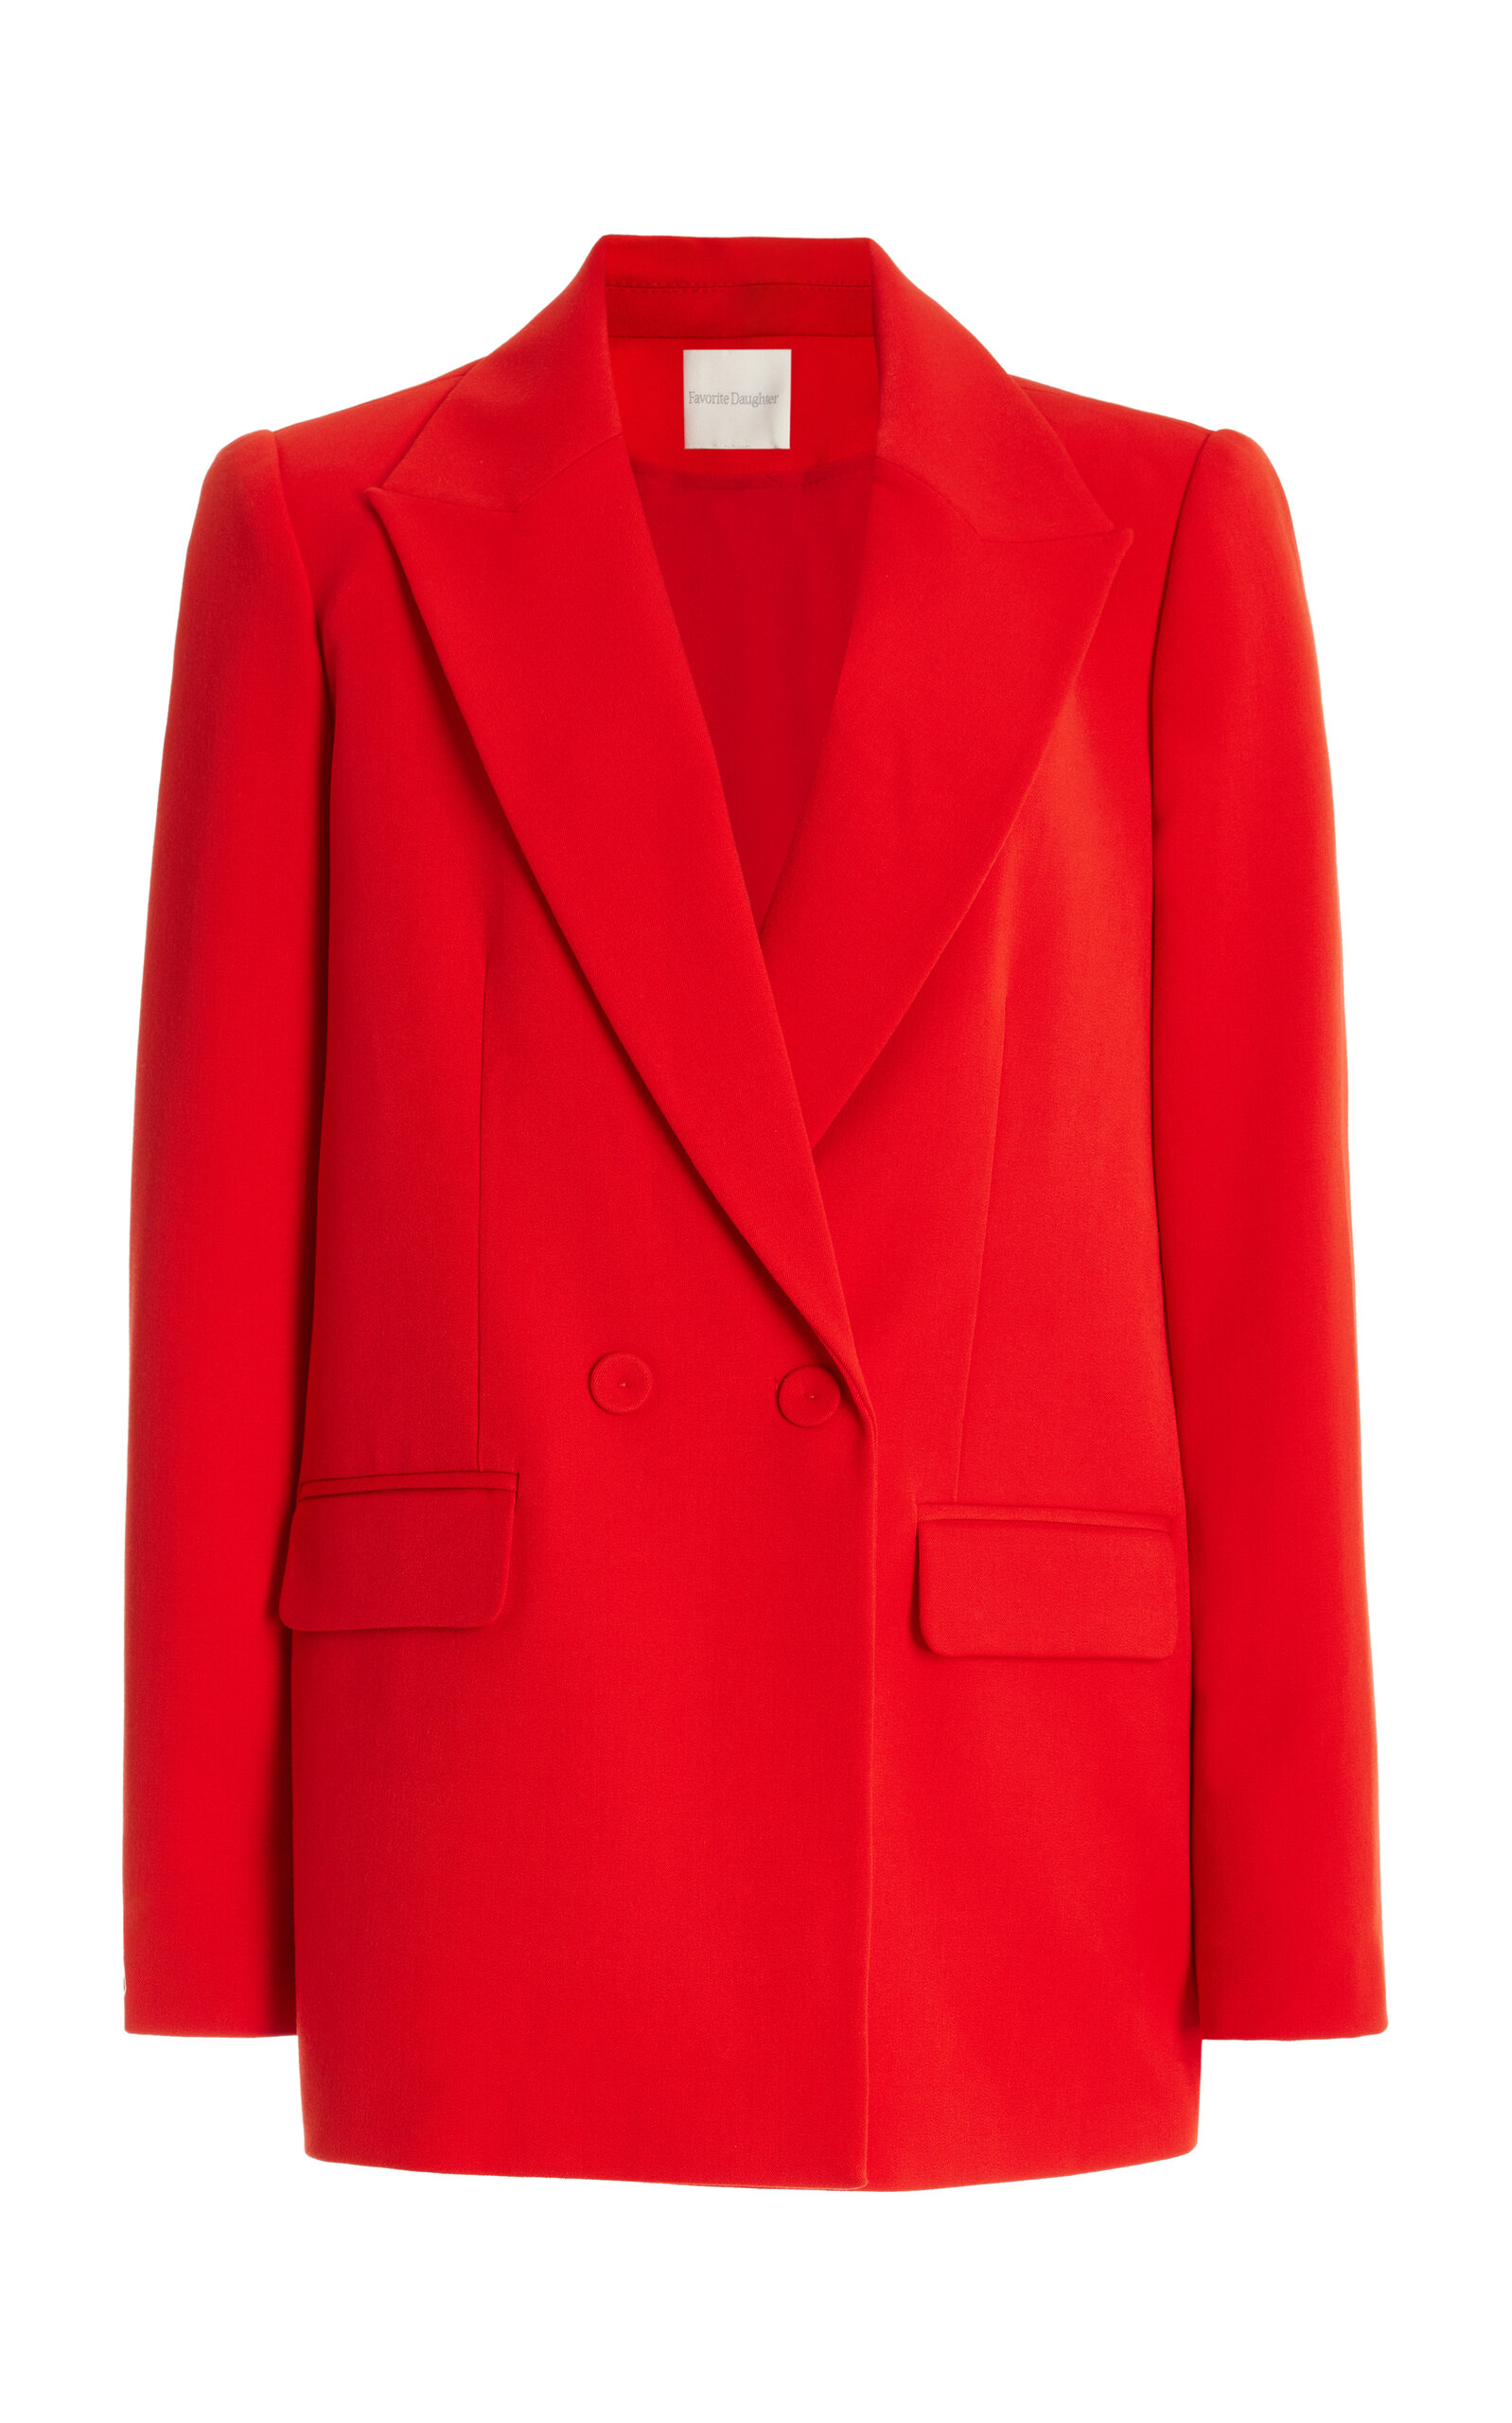 Shop Favorite Daughter Suits You Crepe Blazer In Red